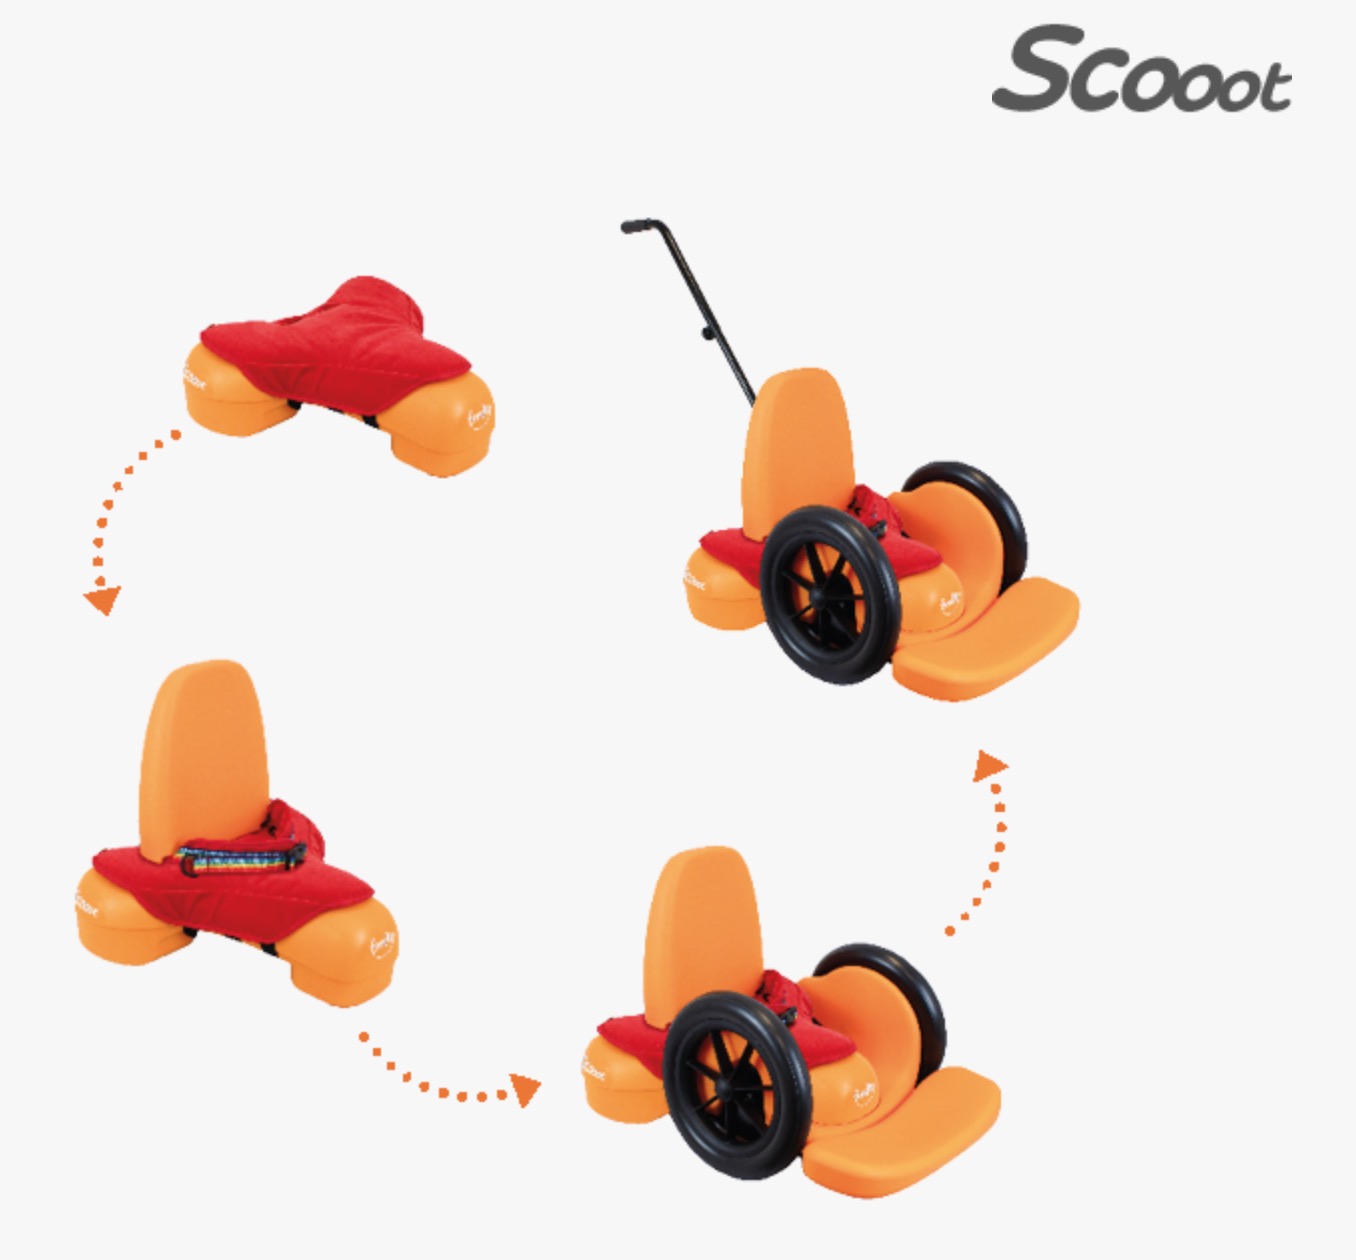 Scooot by FireFly